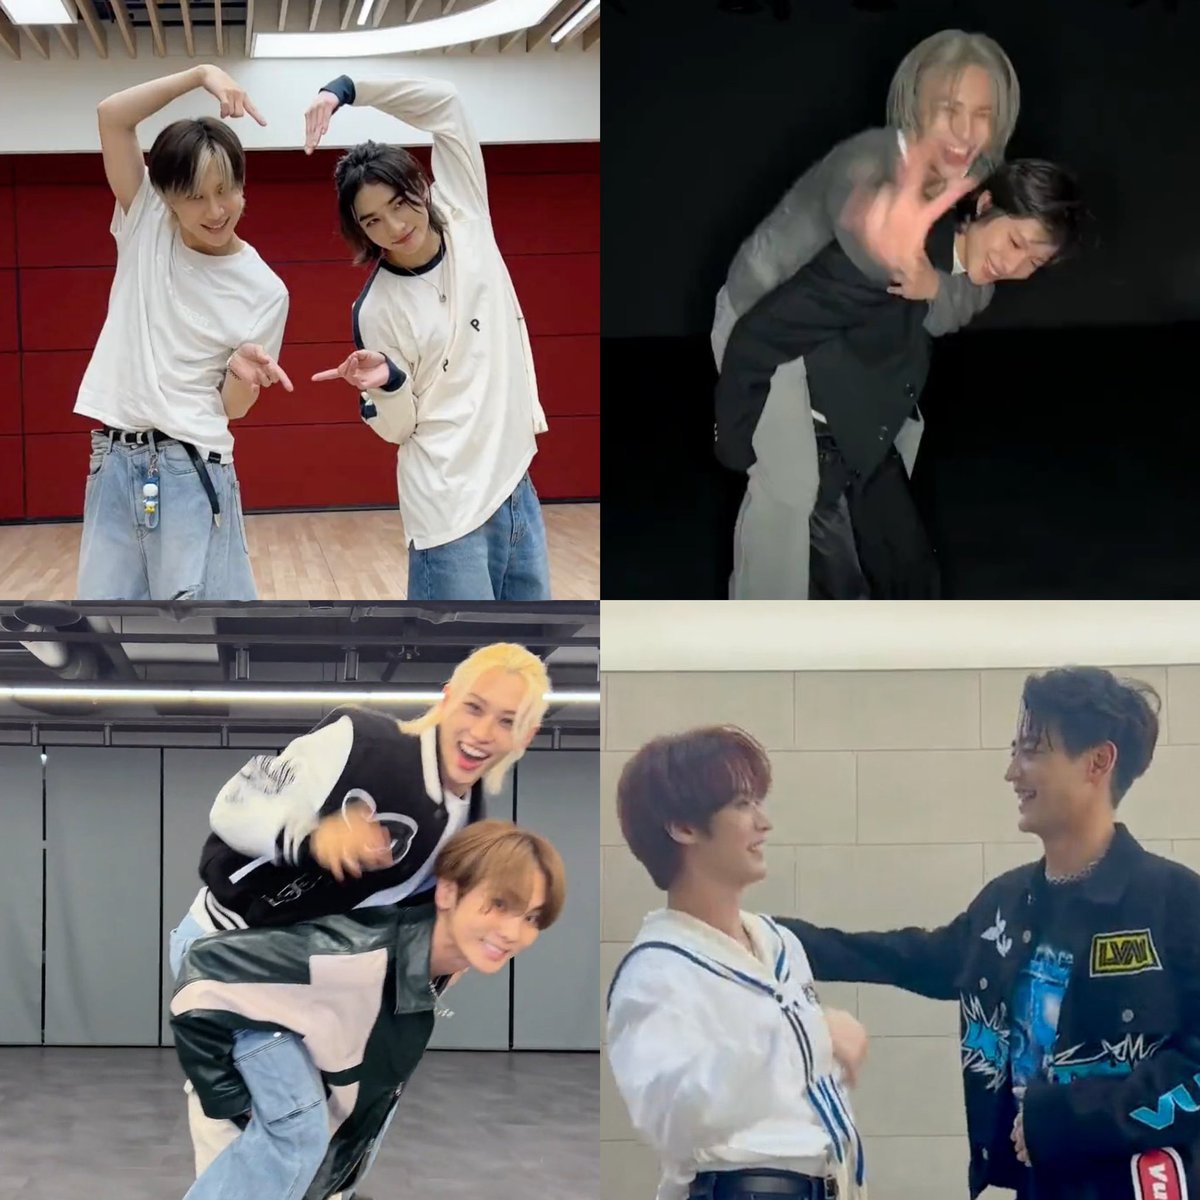 shinee have officially adopted danceracha and the pairings are kinda perfect too like omg 😭